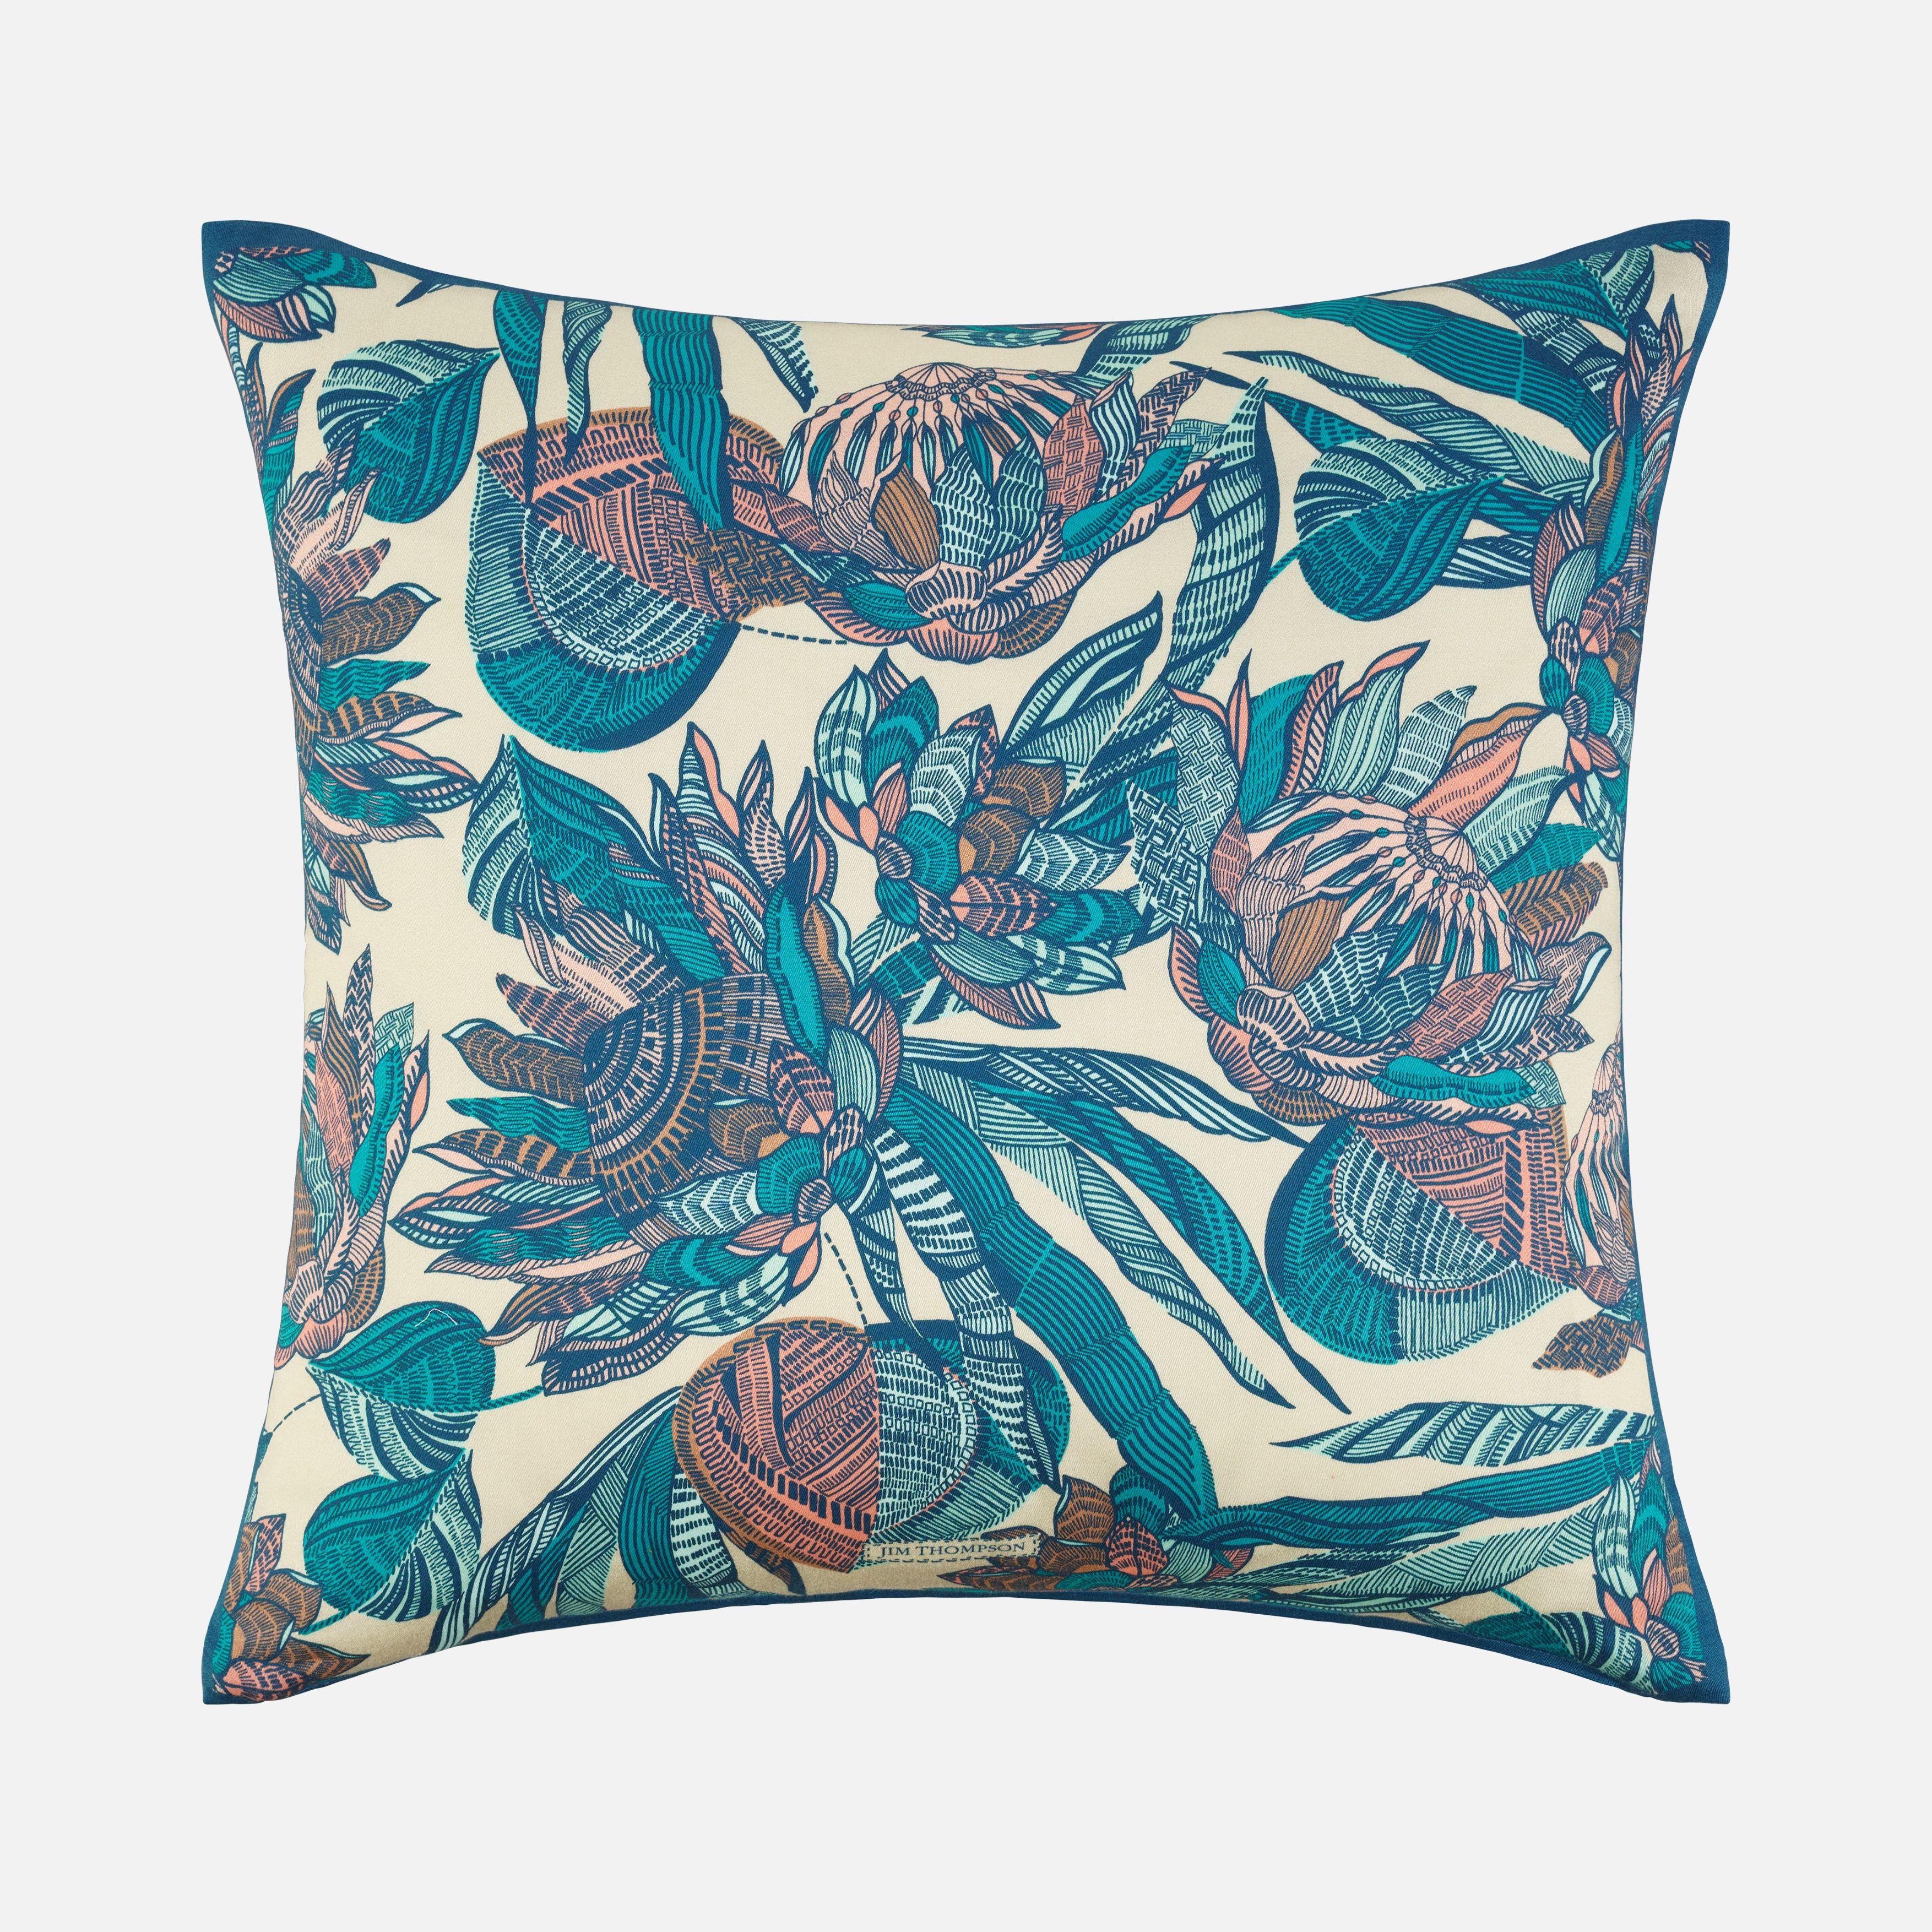 Bamboo Flower Cotton Printed Cushion Cover 18" - Turquoise